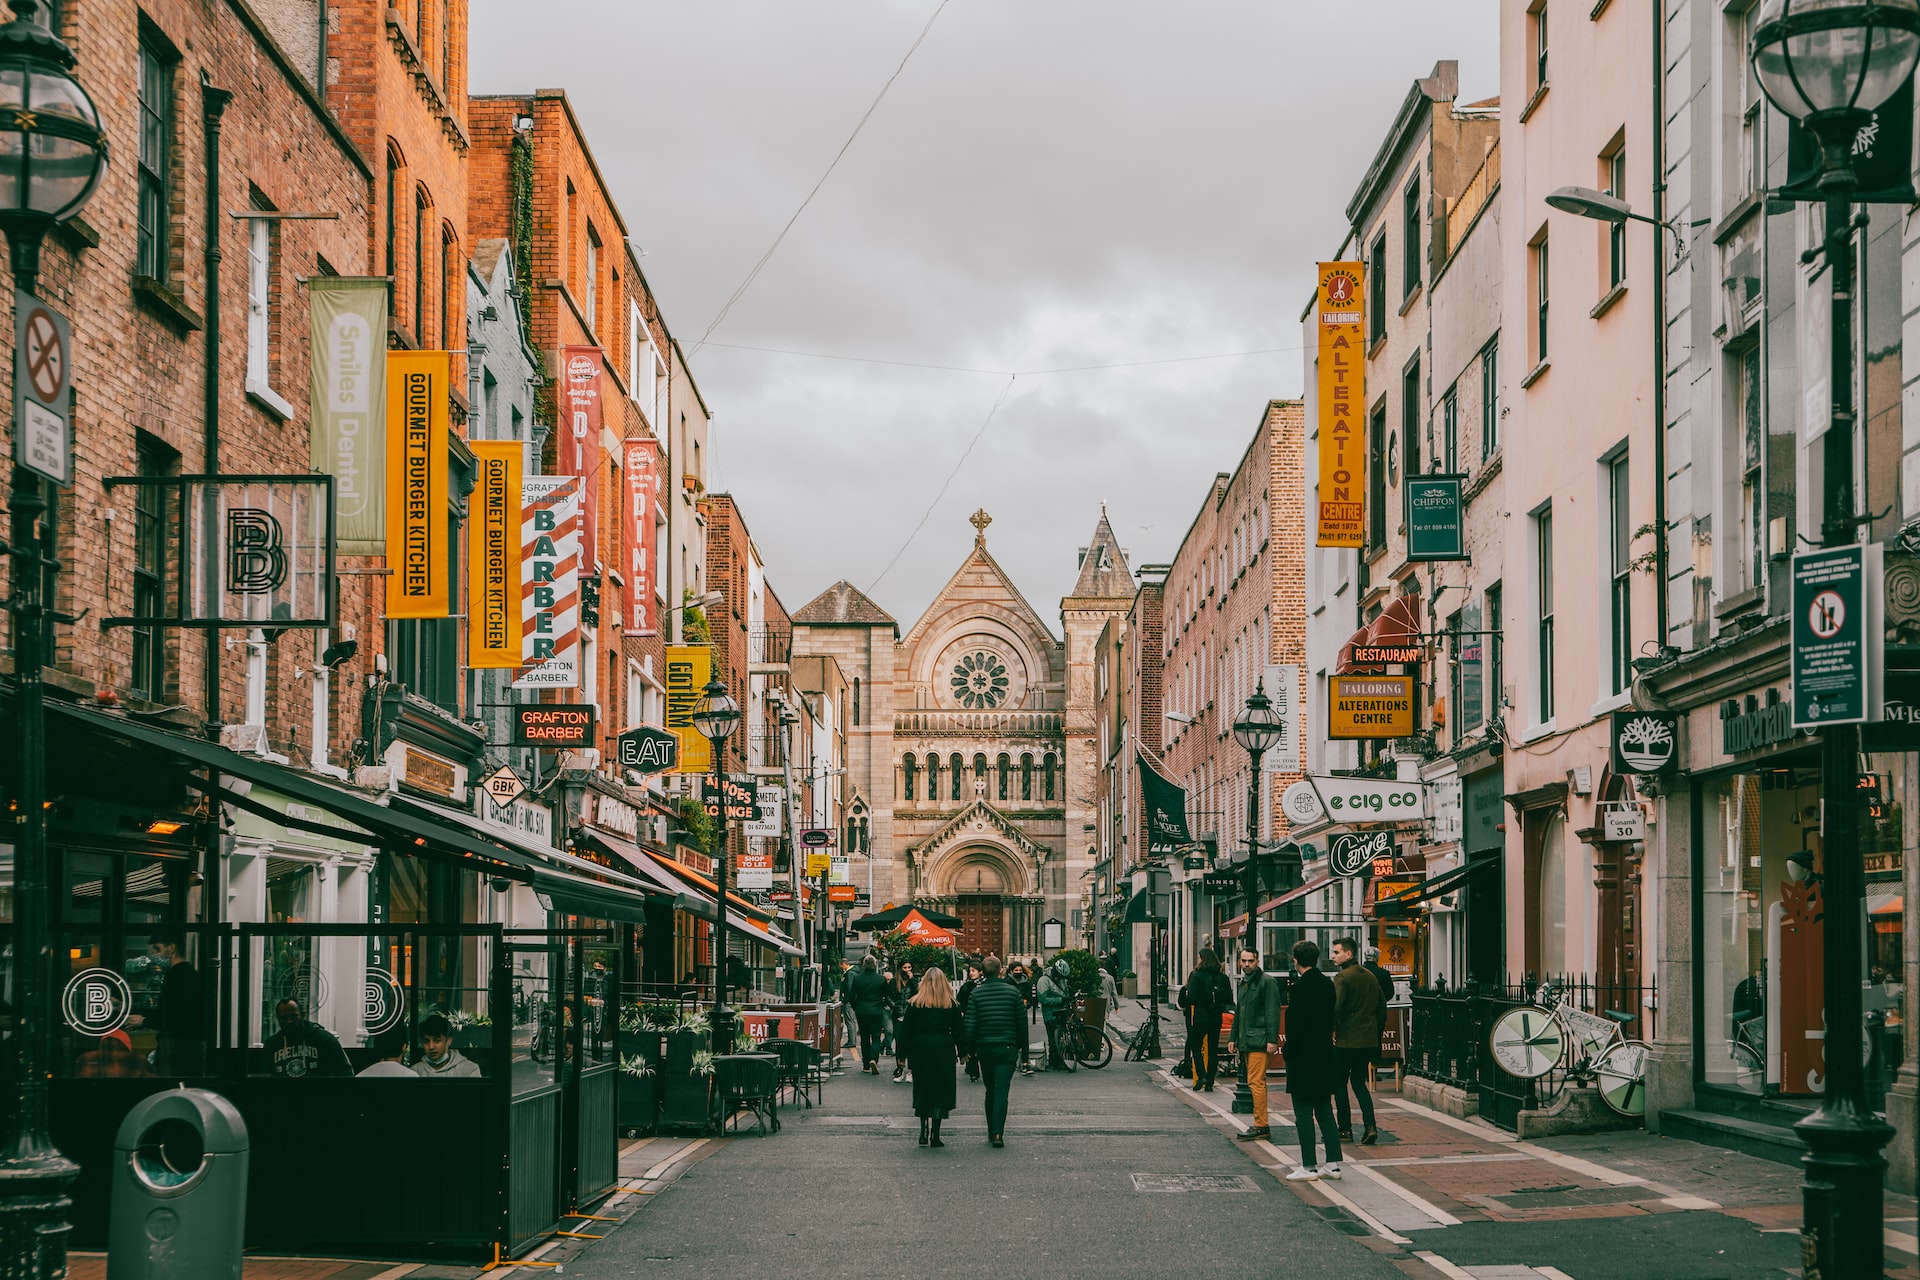 7 Ways To Spend A Fun-Filled Day In Dublin Ireland Without Spending A Euro